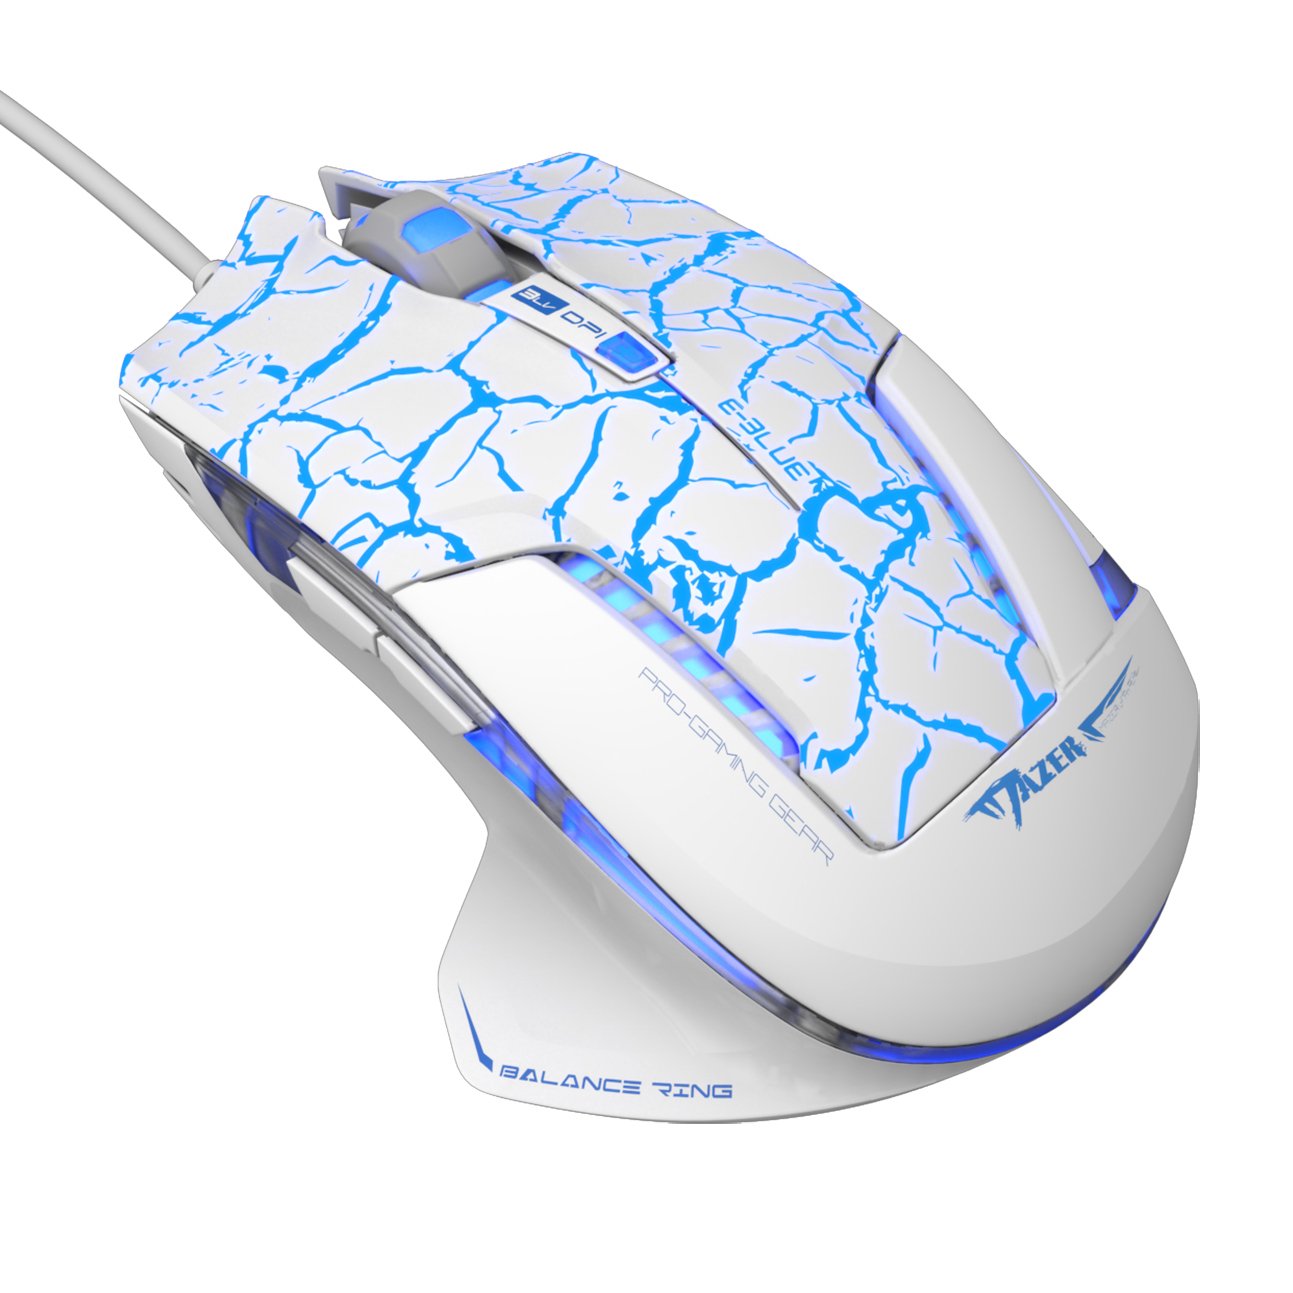 E-Blue EMS600 Mazer Pro Gaming Mouse with Additional Buttons / 2500 DPI / Avago Chipset / USB / White